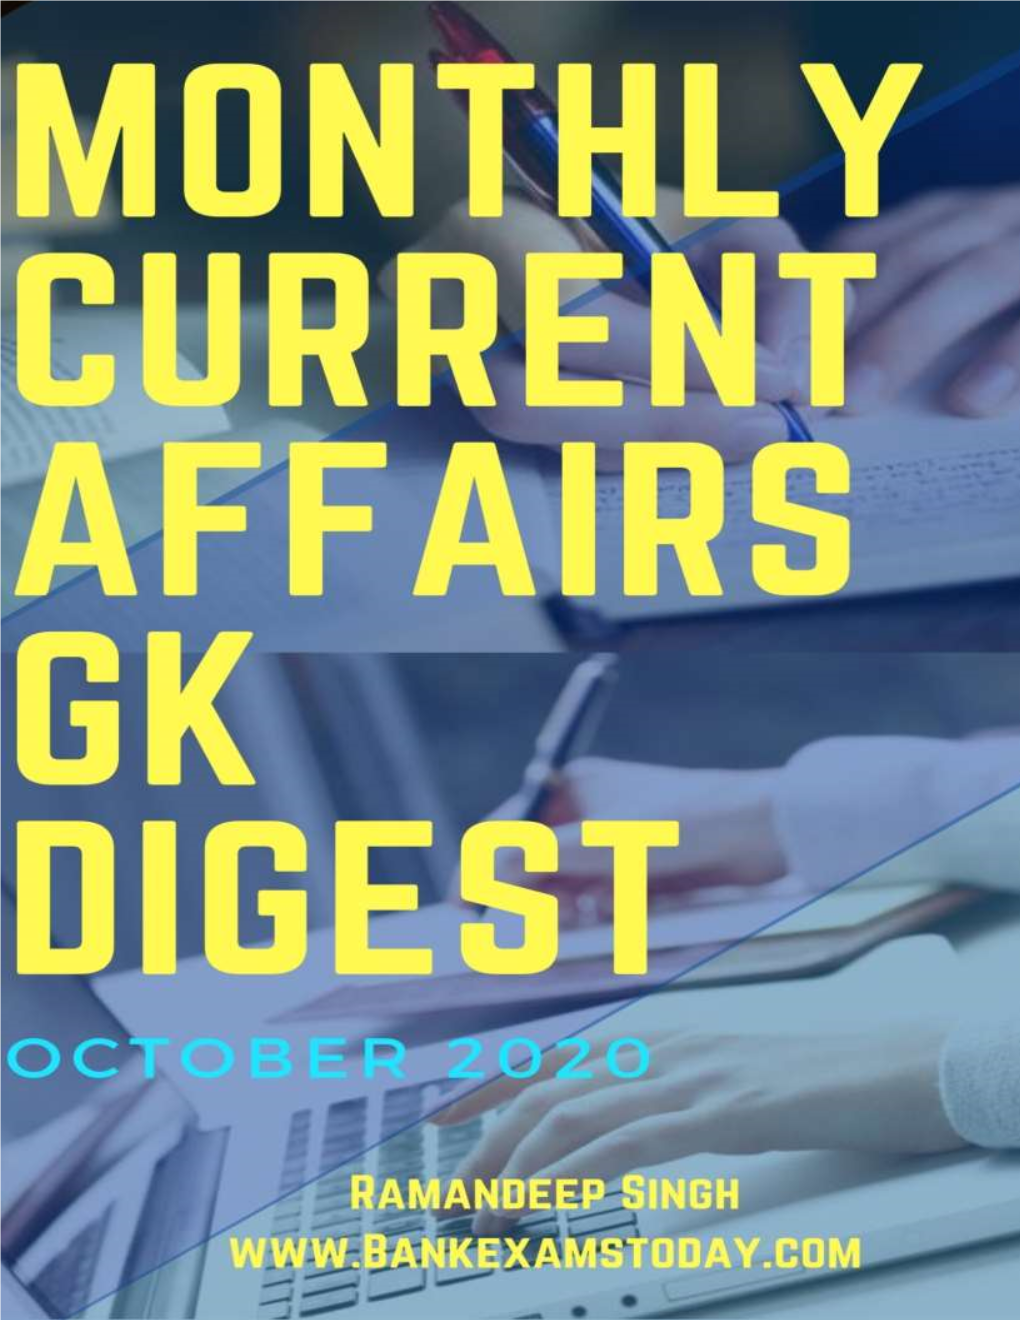 Monthly Current Affairs GK Digest: October 2020